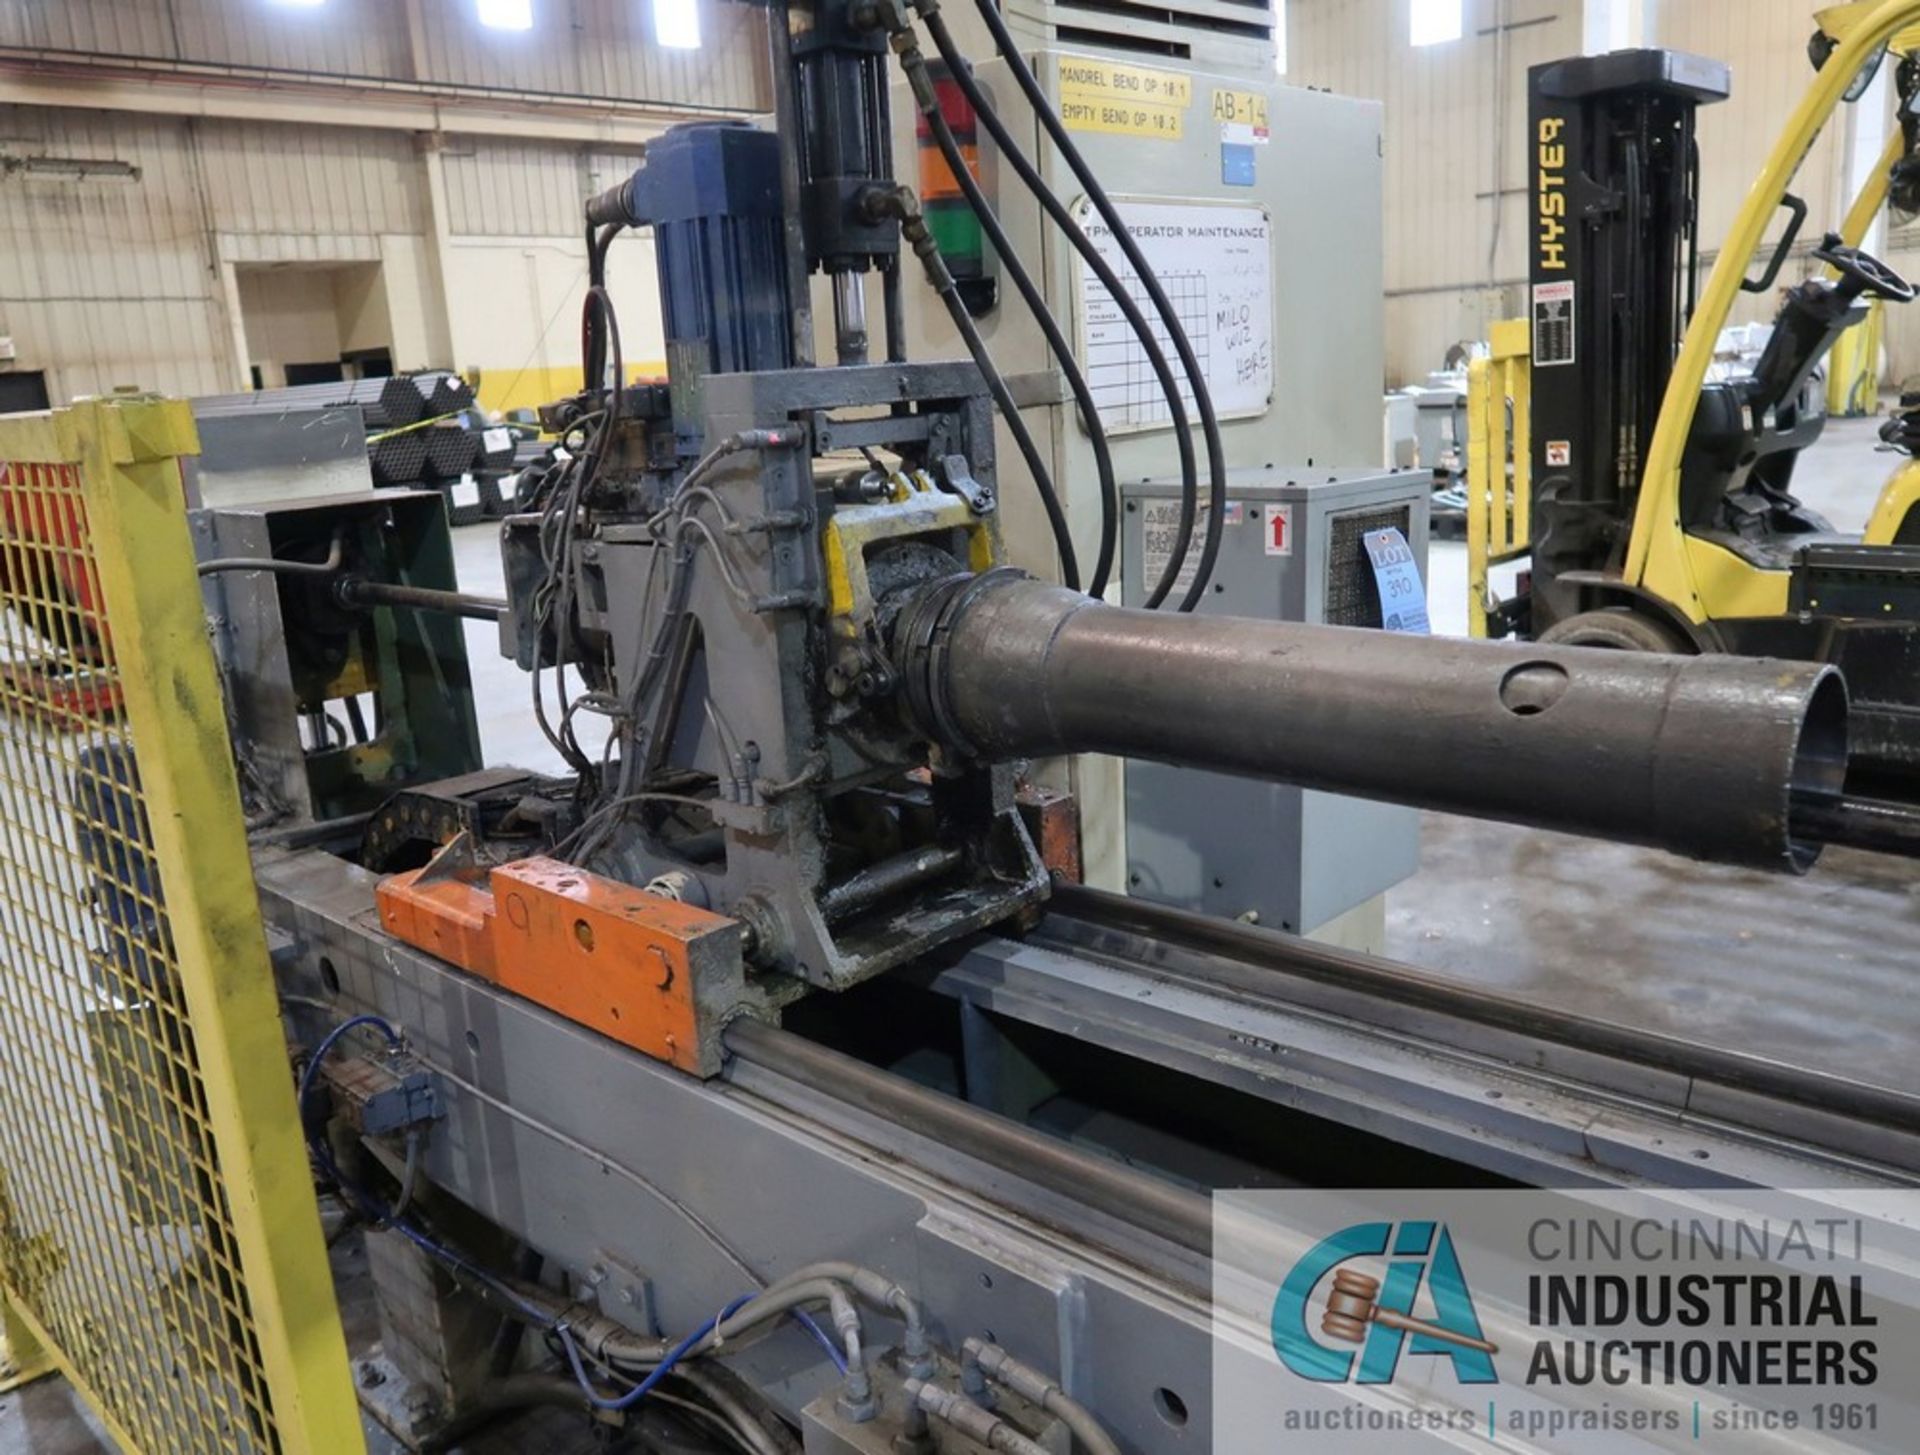 3" ADDISON DB76-ST3 MULTI-STACK 5-AXIS CNC HYDRAULIC TUBE BENDER; S/N 9952, ASSET NO. AB-14, 3" - Image 4 of 15